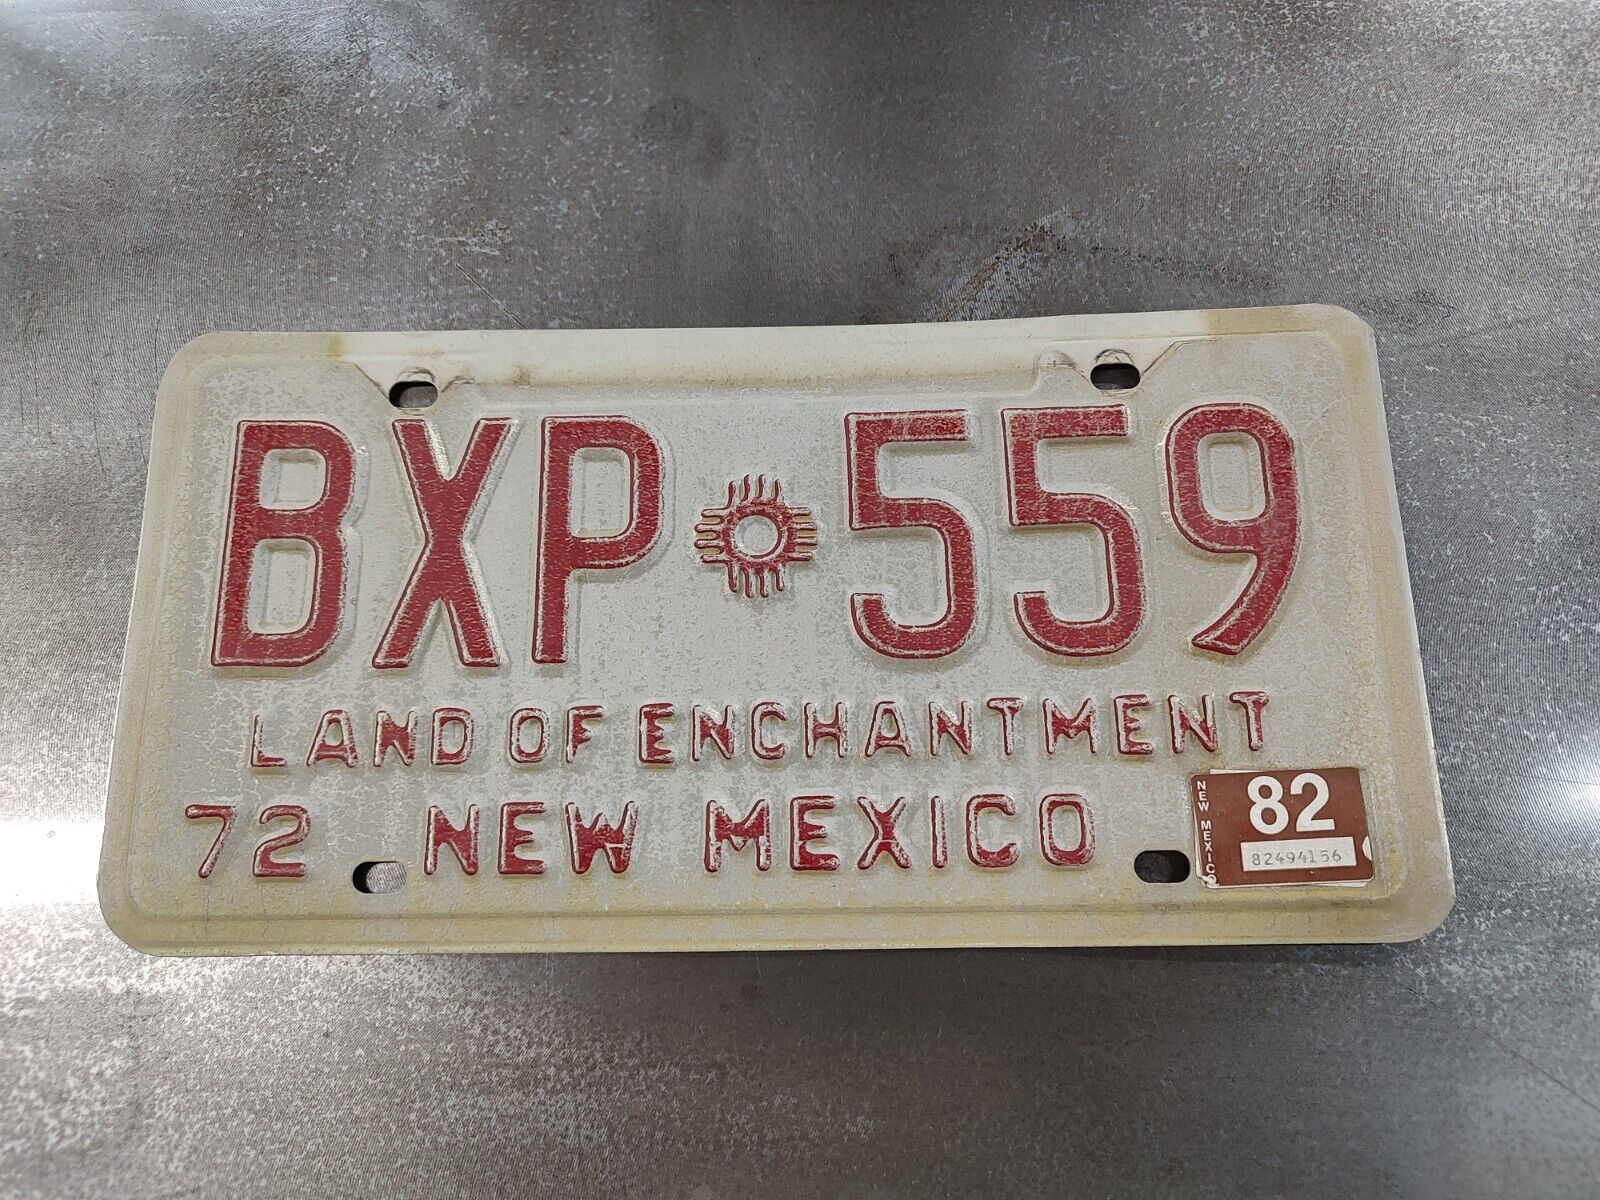 1972  New Mexico License Plate Land of Enchantment BXP 559  Vintage with wear